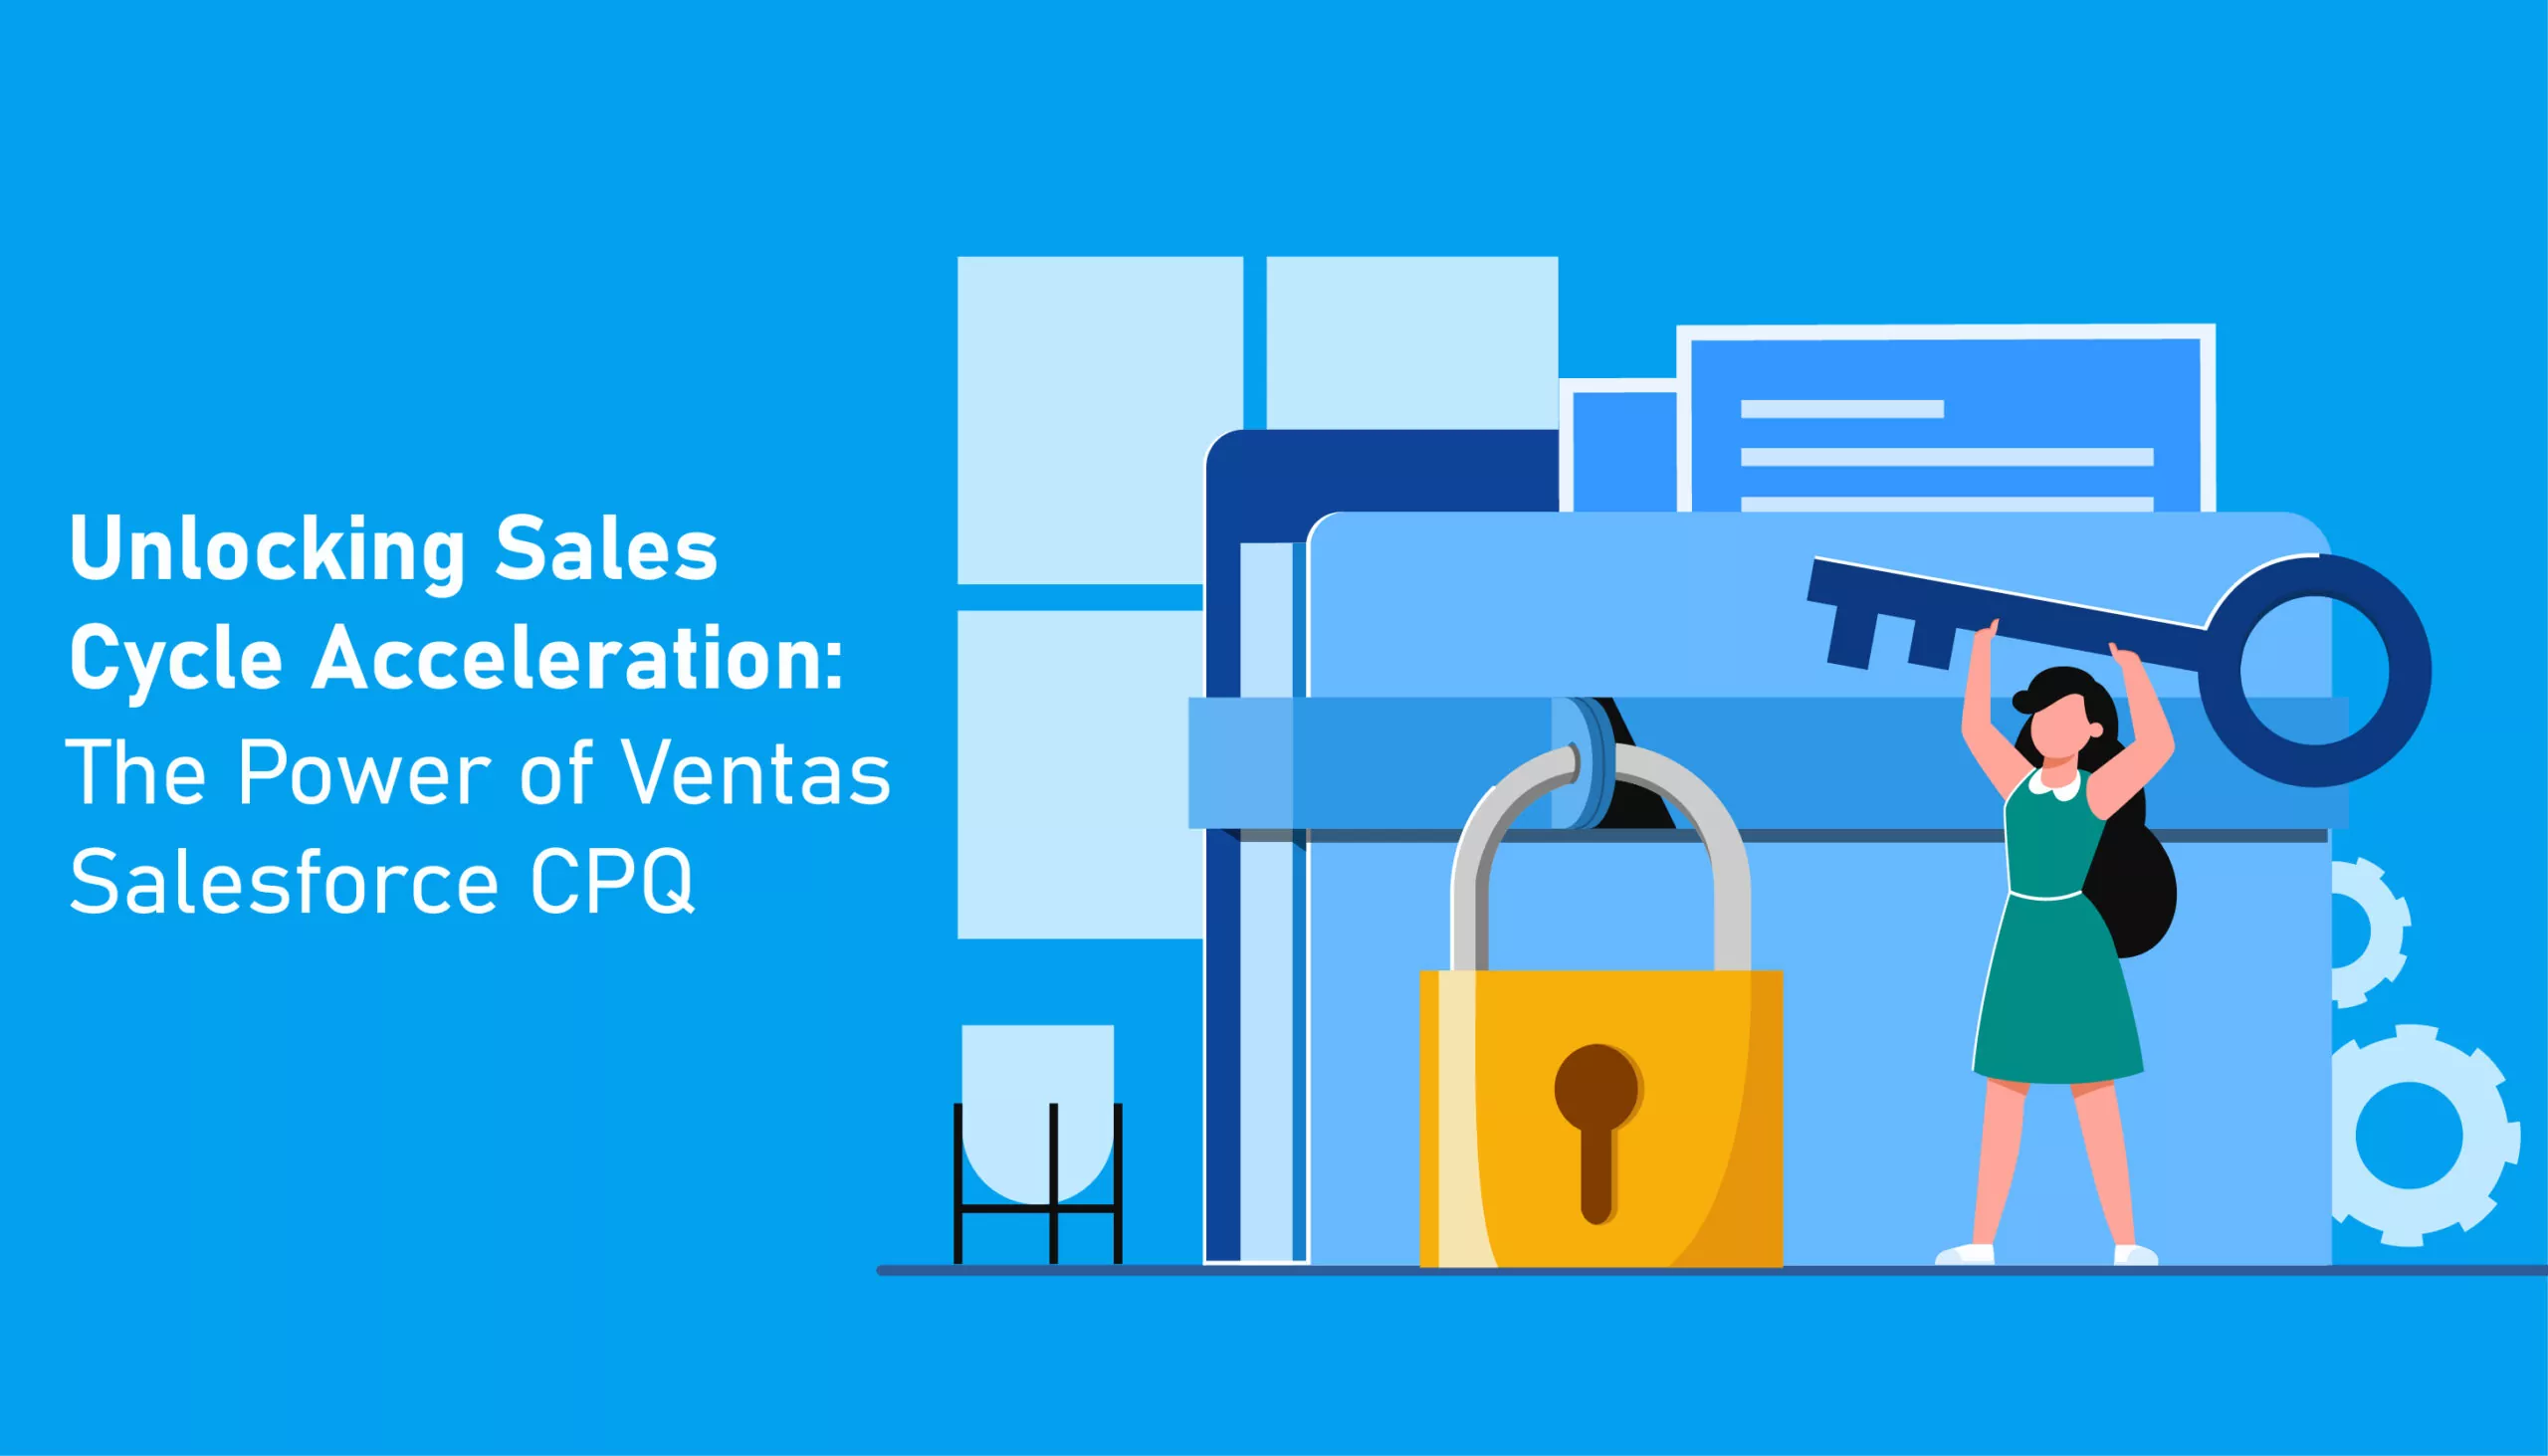 Unlocking Sales Cycle Acceleration: The Power of Ventas Salesforce CPQ